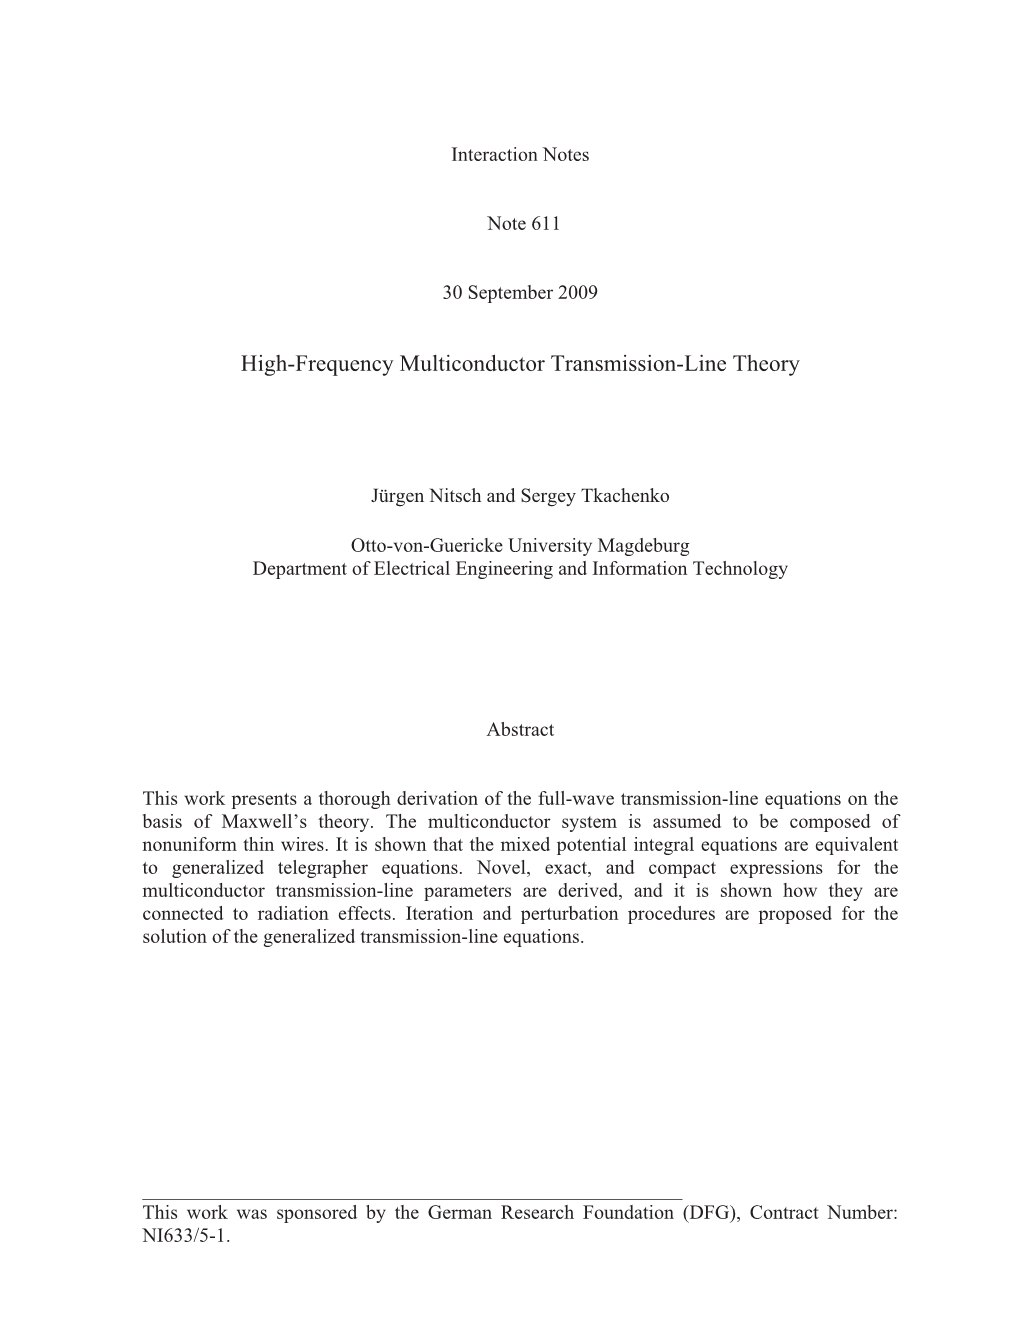 High-Frequency Multiconductor Transmission-Line Theory